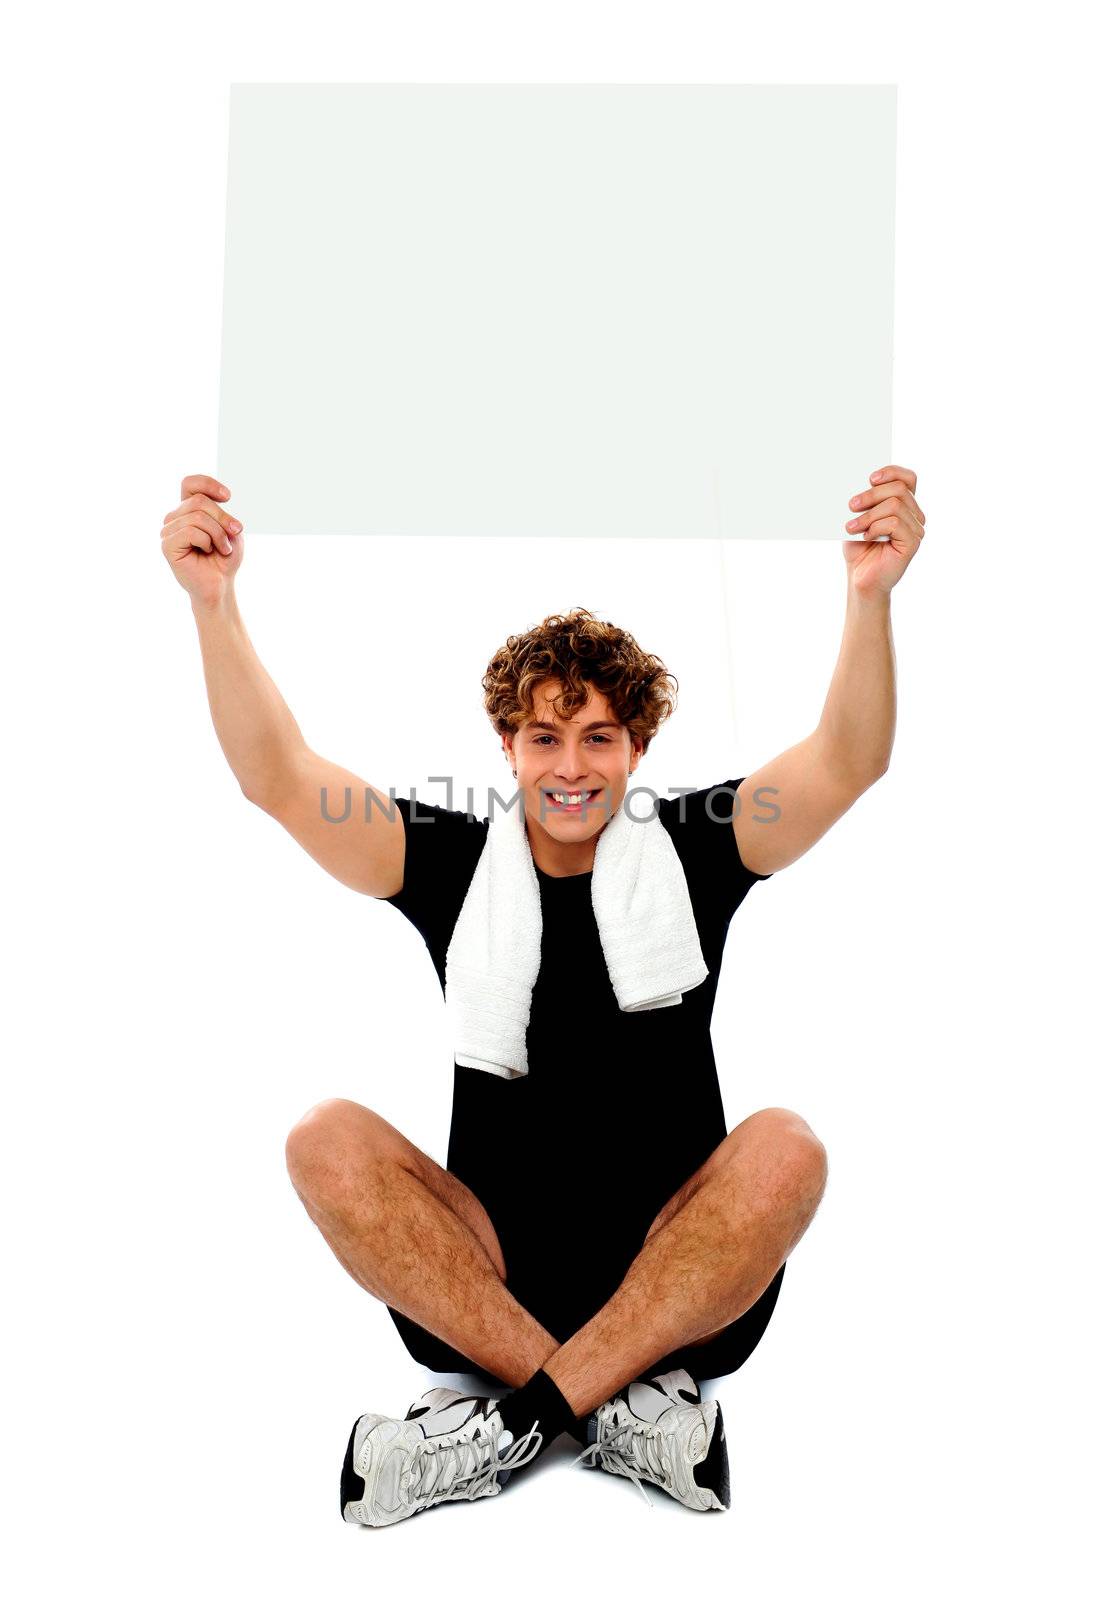 Handsome athlete holding blank placard over his head. Towel wrapped around neck